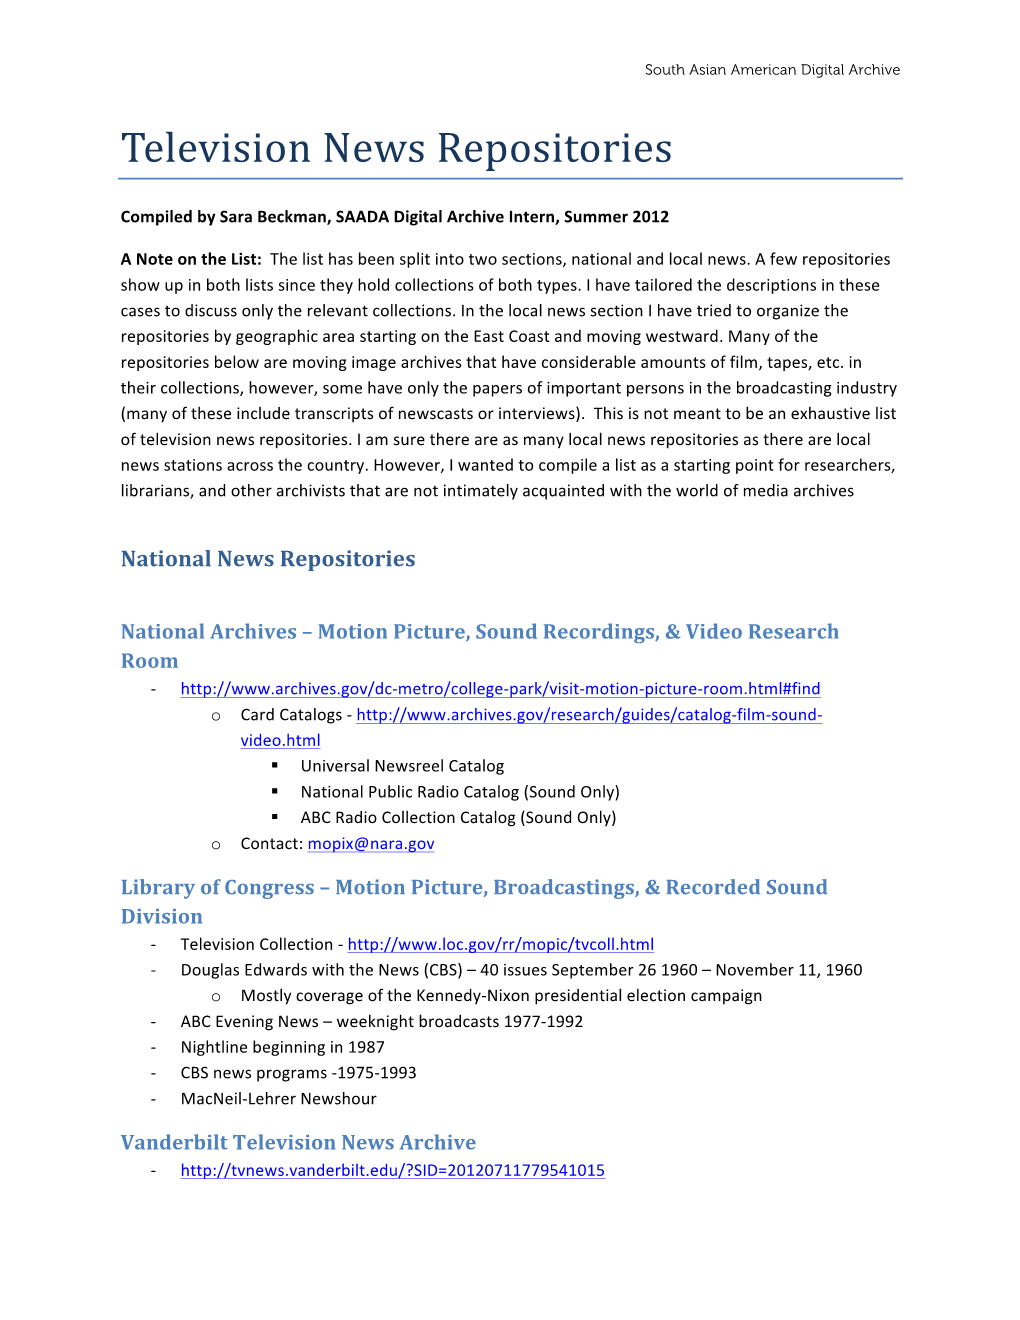 Television News Repositories